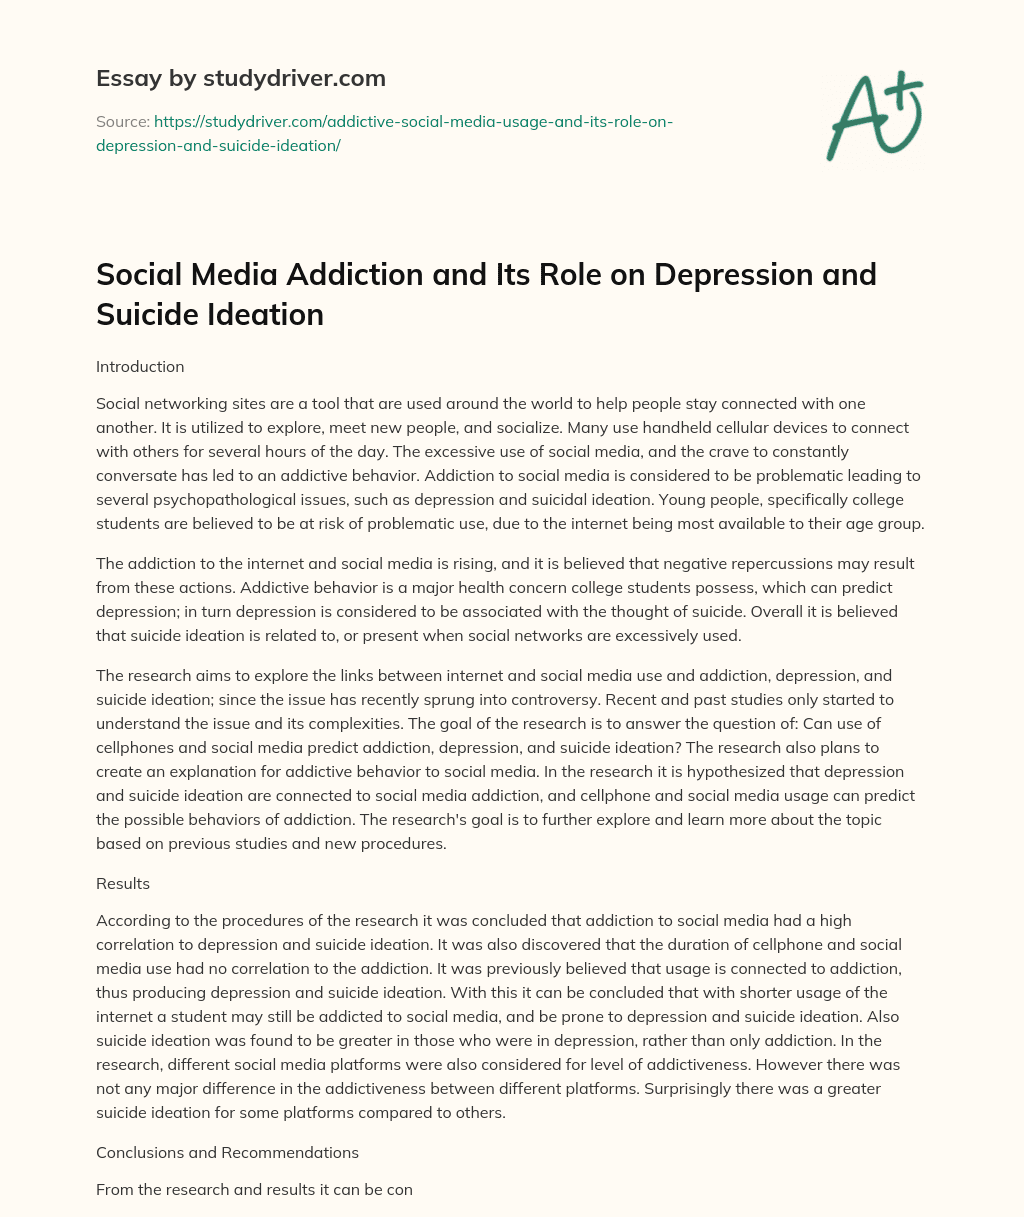 Social Media Addiction and its Role on Depression and Suicide Ideation essay